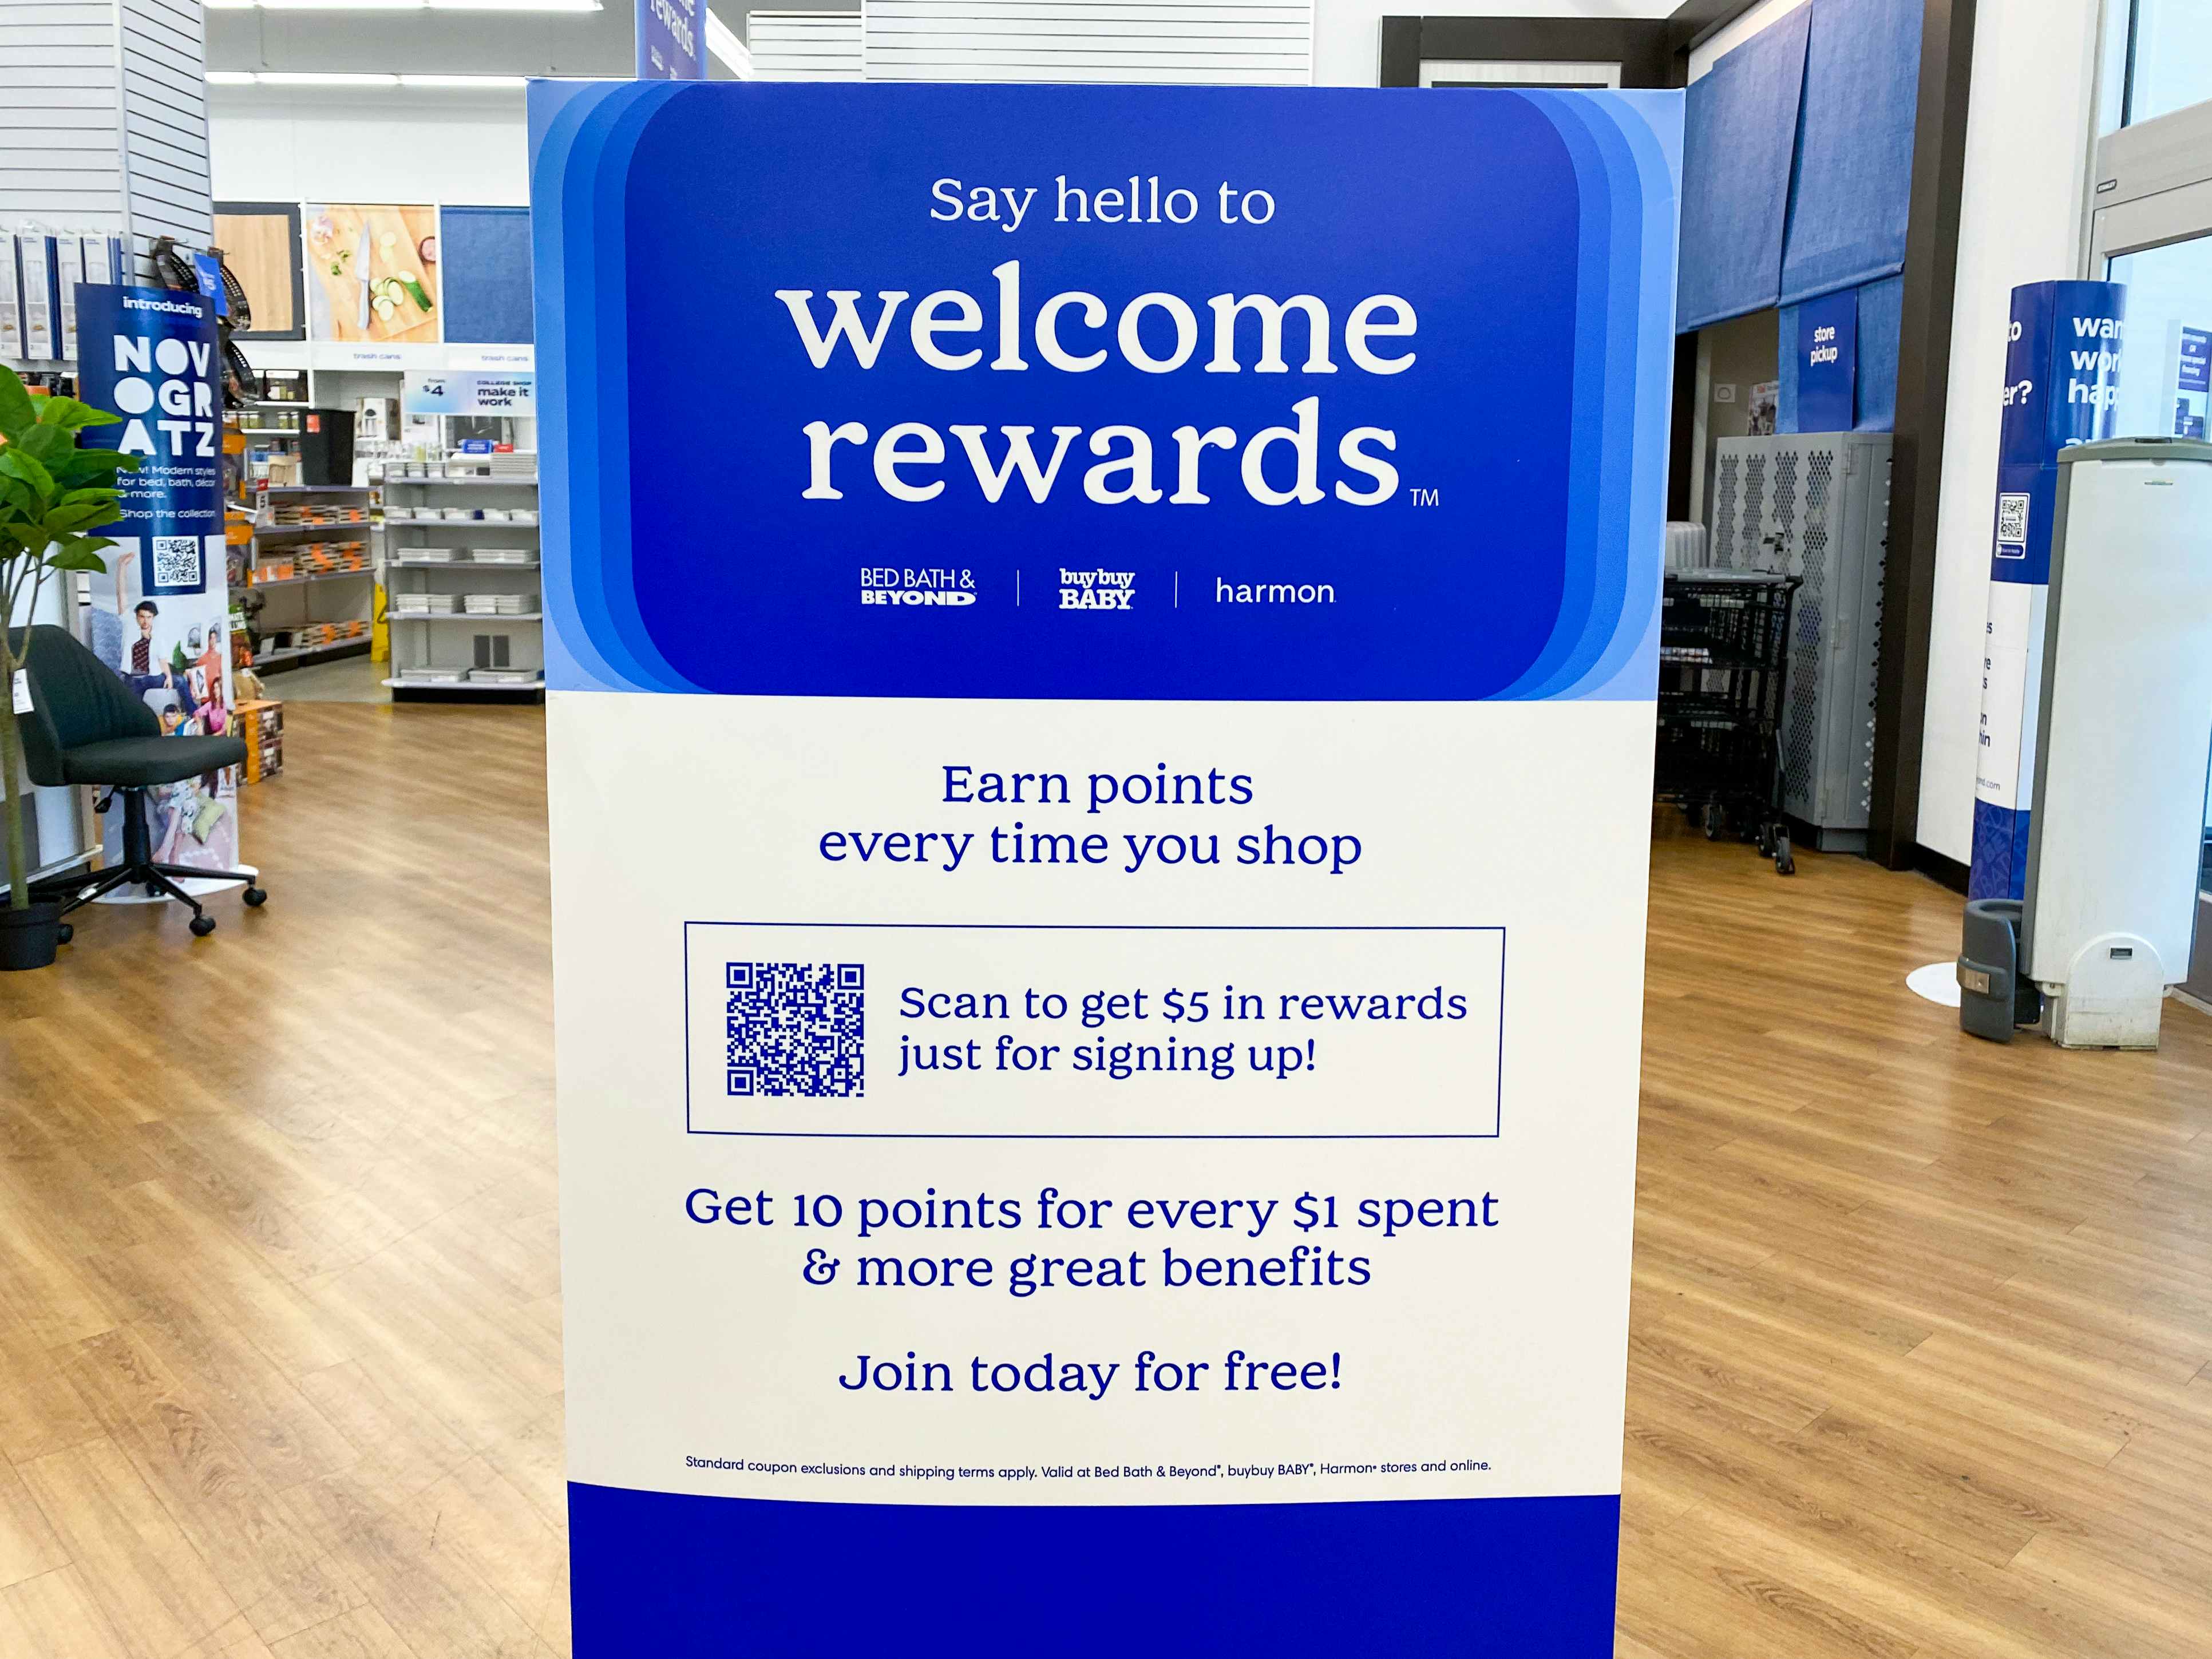 A sign for Bed Bath & Beyond's Welcome Rewards program which reads, "Earn points every time you shop. Get 10 points for every $1 spent and more great savings. Join today for free!" with a QR code to scan, offering $5 in rewards for signing up.